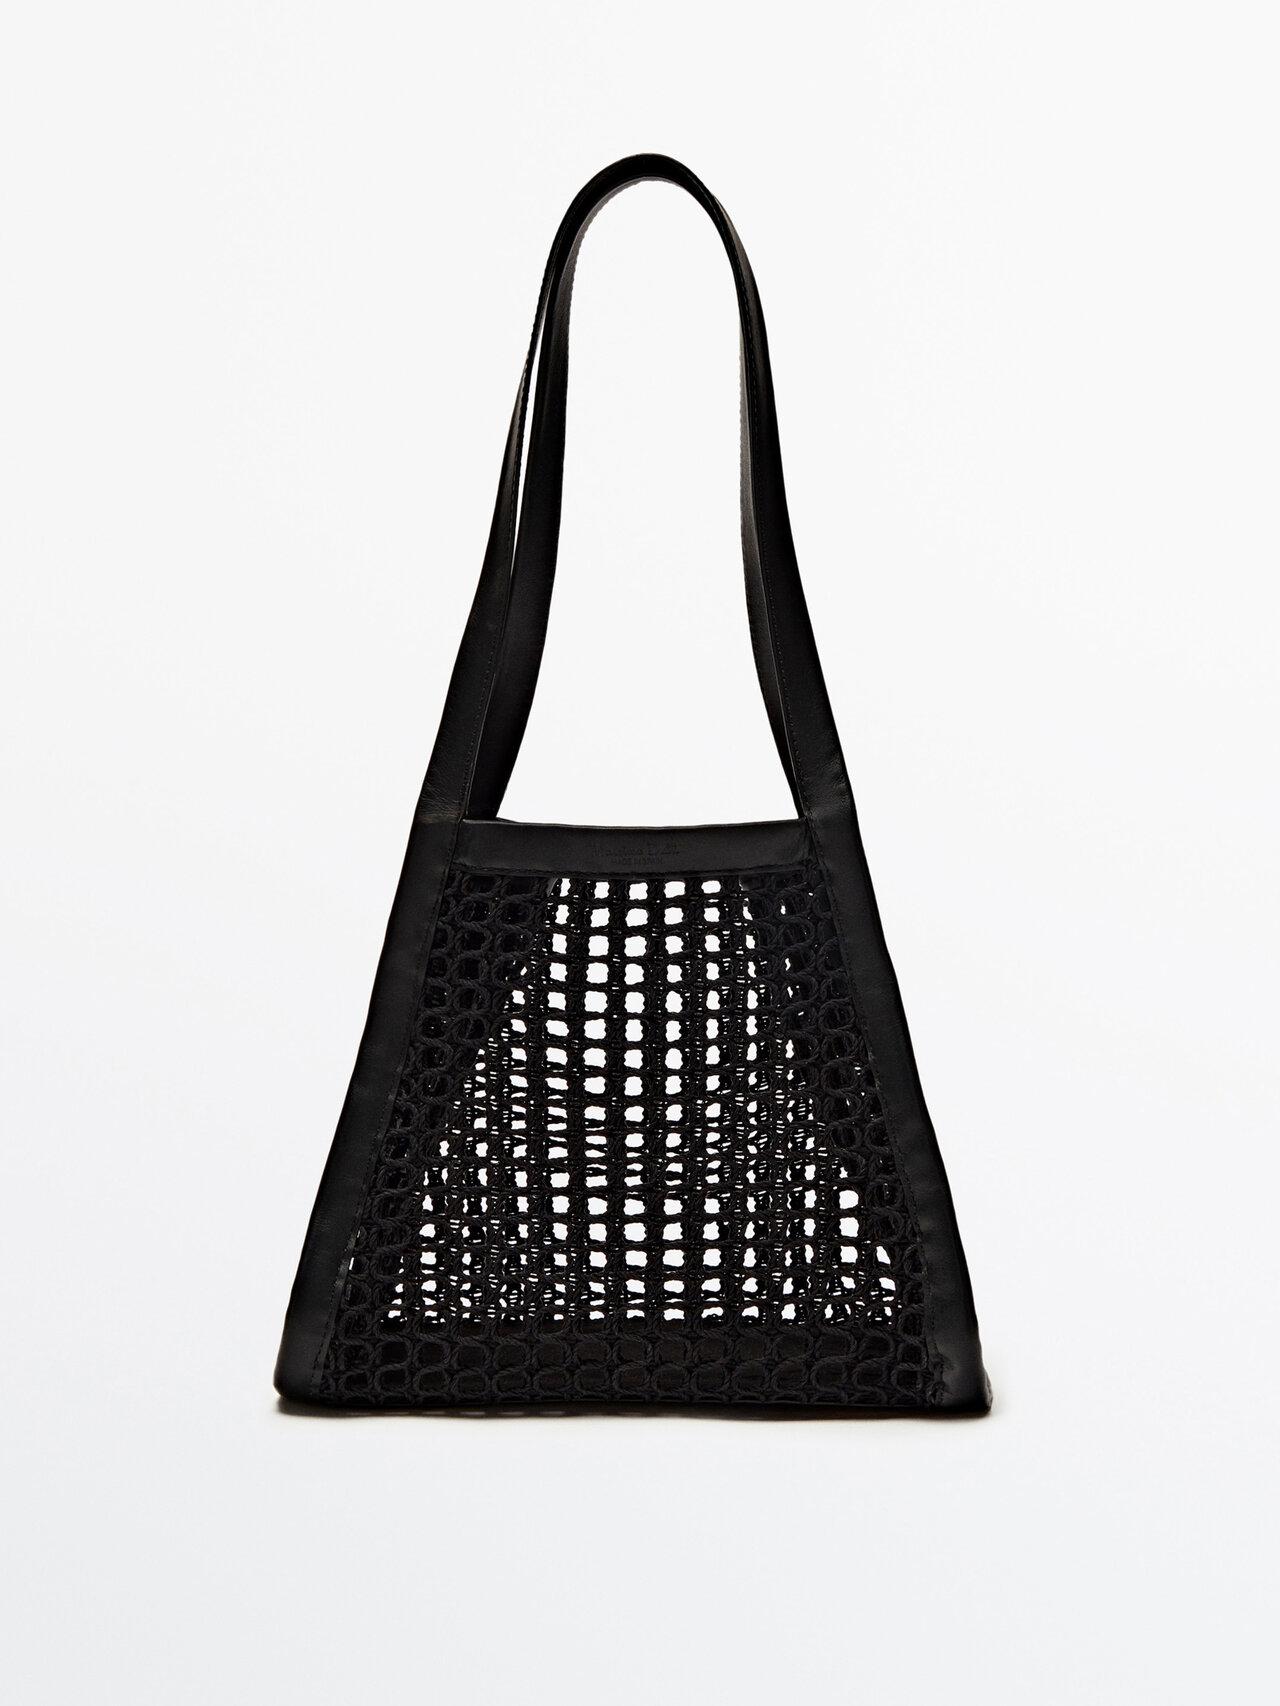 MASSIMO DUTTI Contrast Leather Mesh Bag - Limited Edition in Black | Lyst